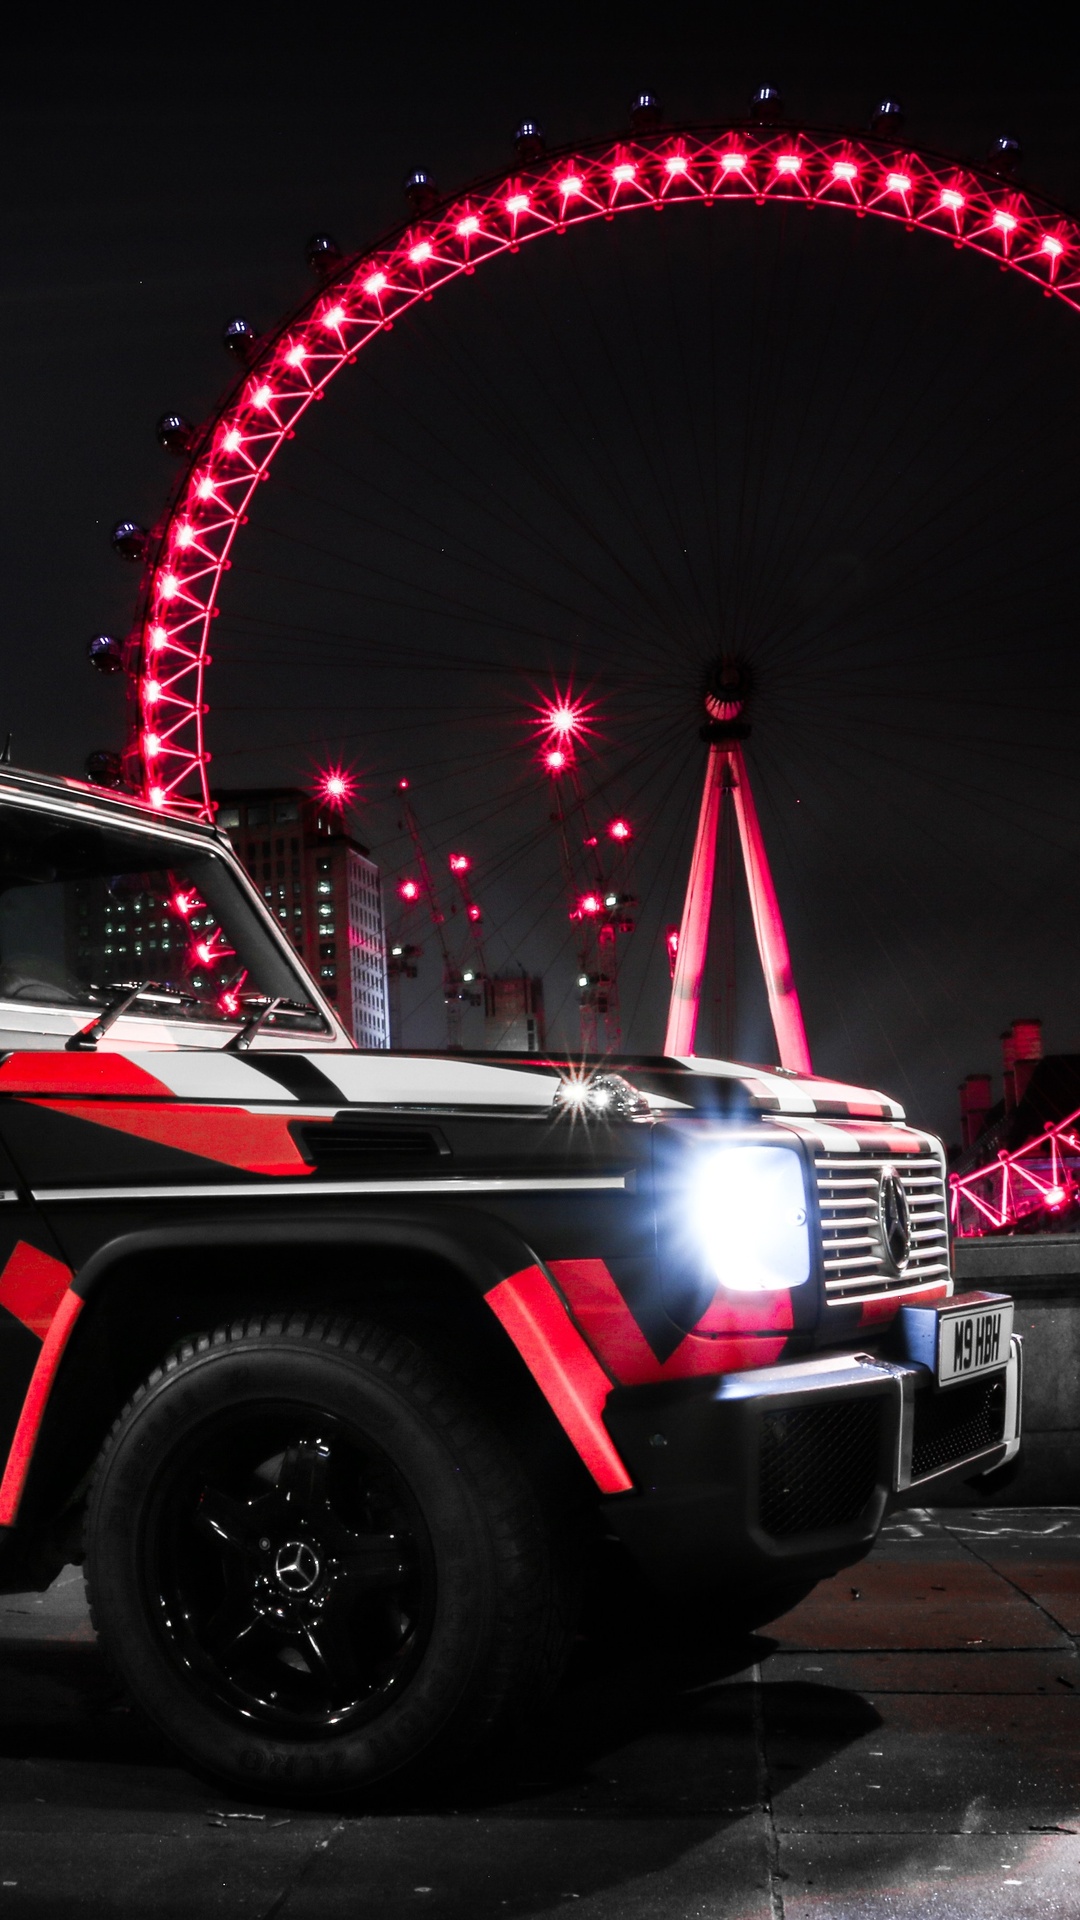 1080x1920 Custom Mercedes G Wagon London Eye Iphone 7,6s,6 Plus, Pixel xl  ,One Plus 3,3t,5 HD 4k Wallpapers, Images, Backgrounds, Photos and Pictures